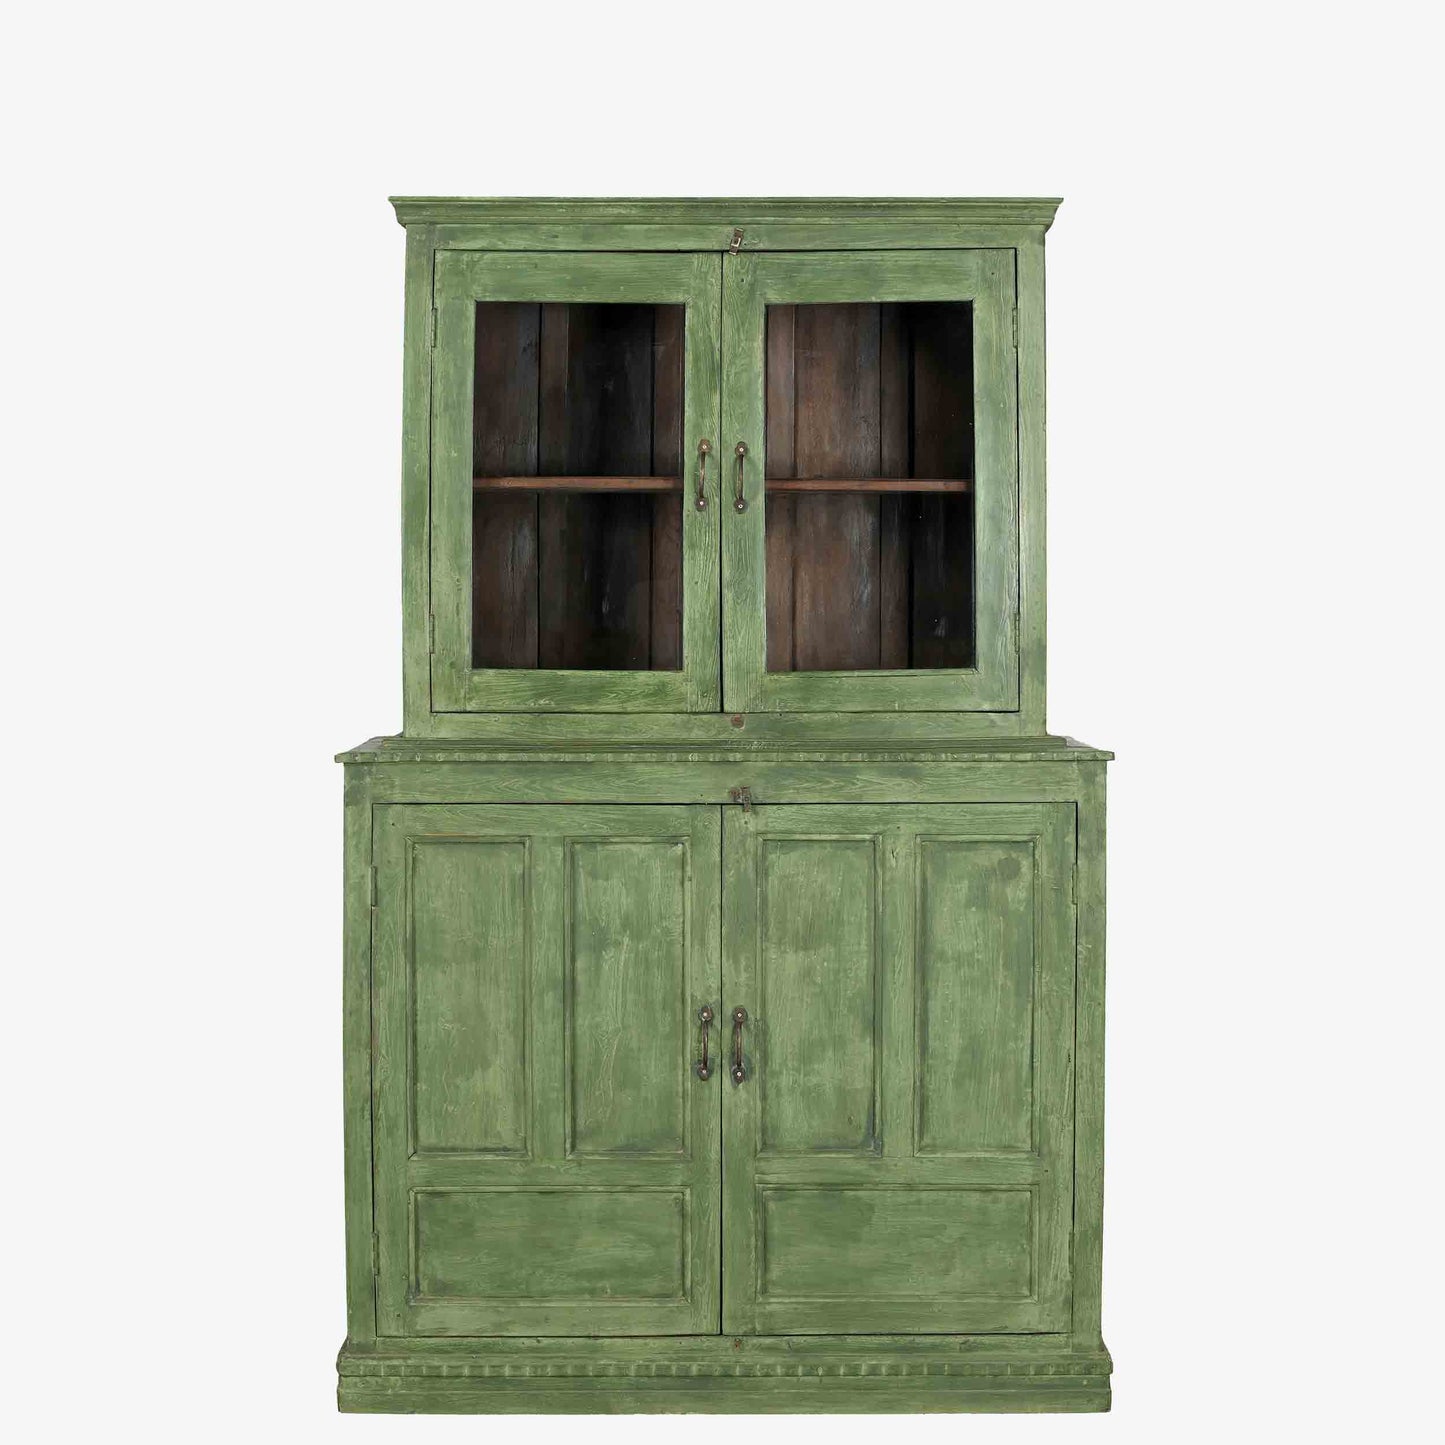 The Phelim Antique Cupboard Dresser in New Green